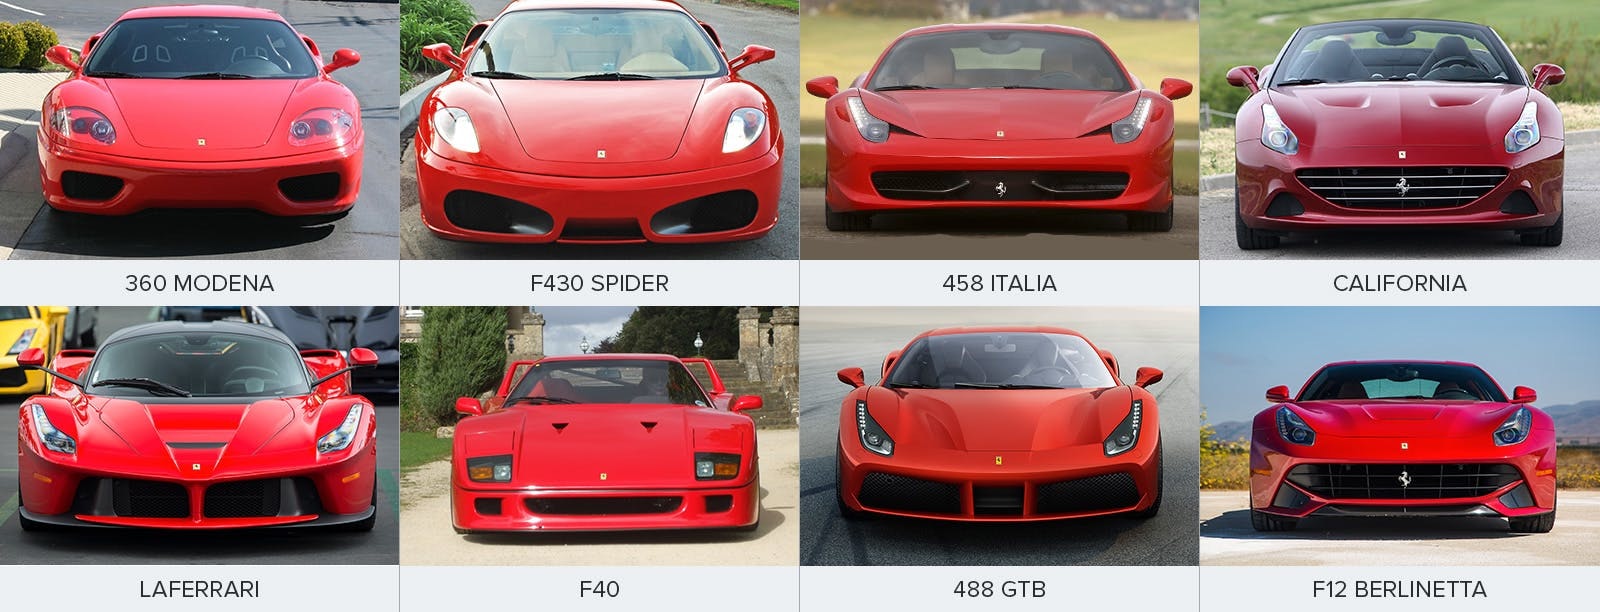 Ferrari Models: How To Tell The Difference